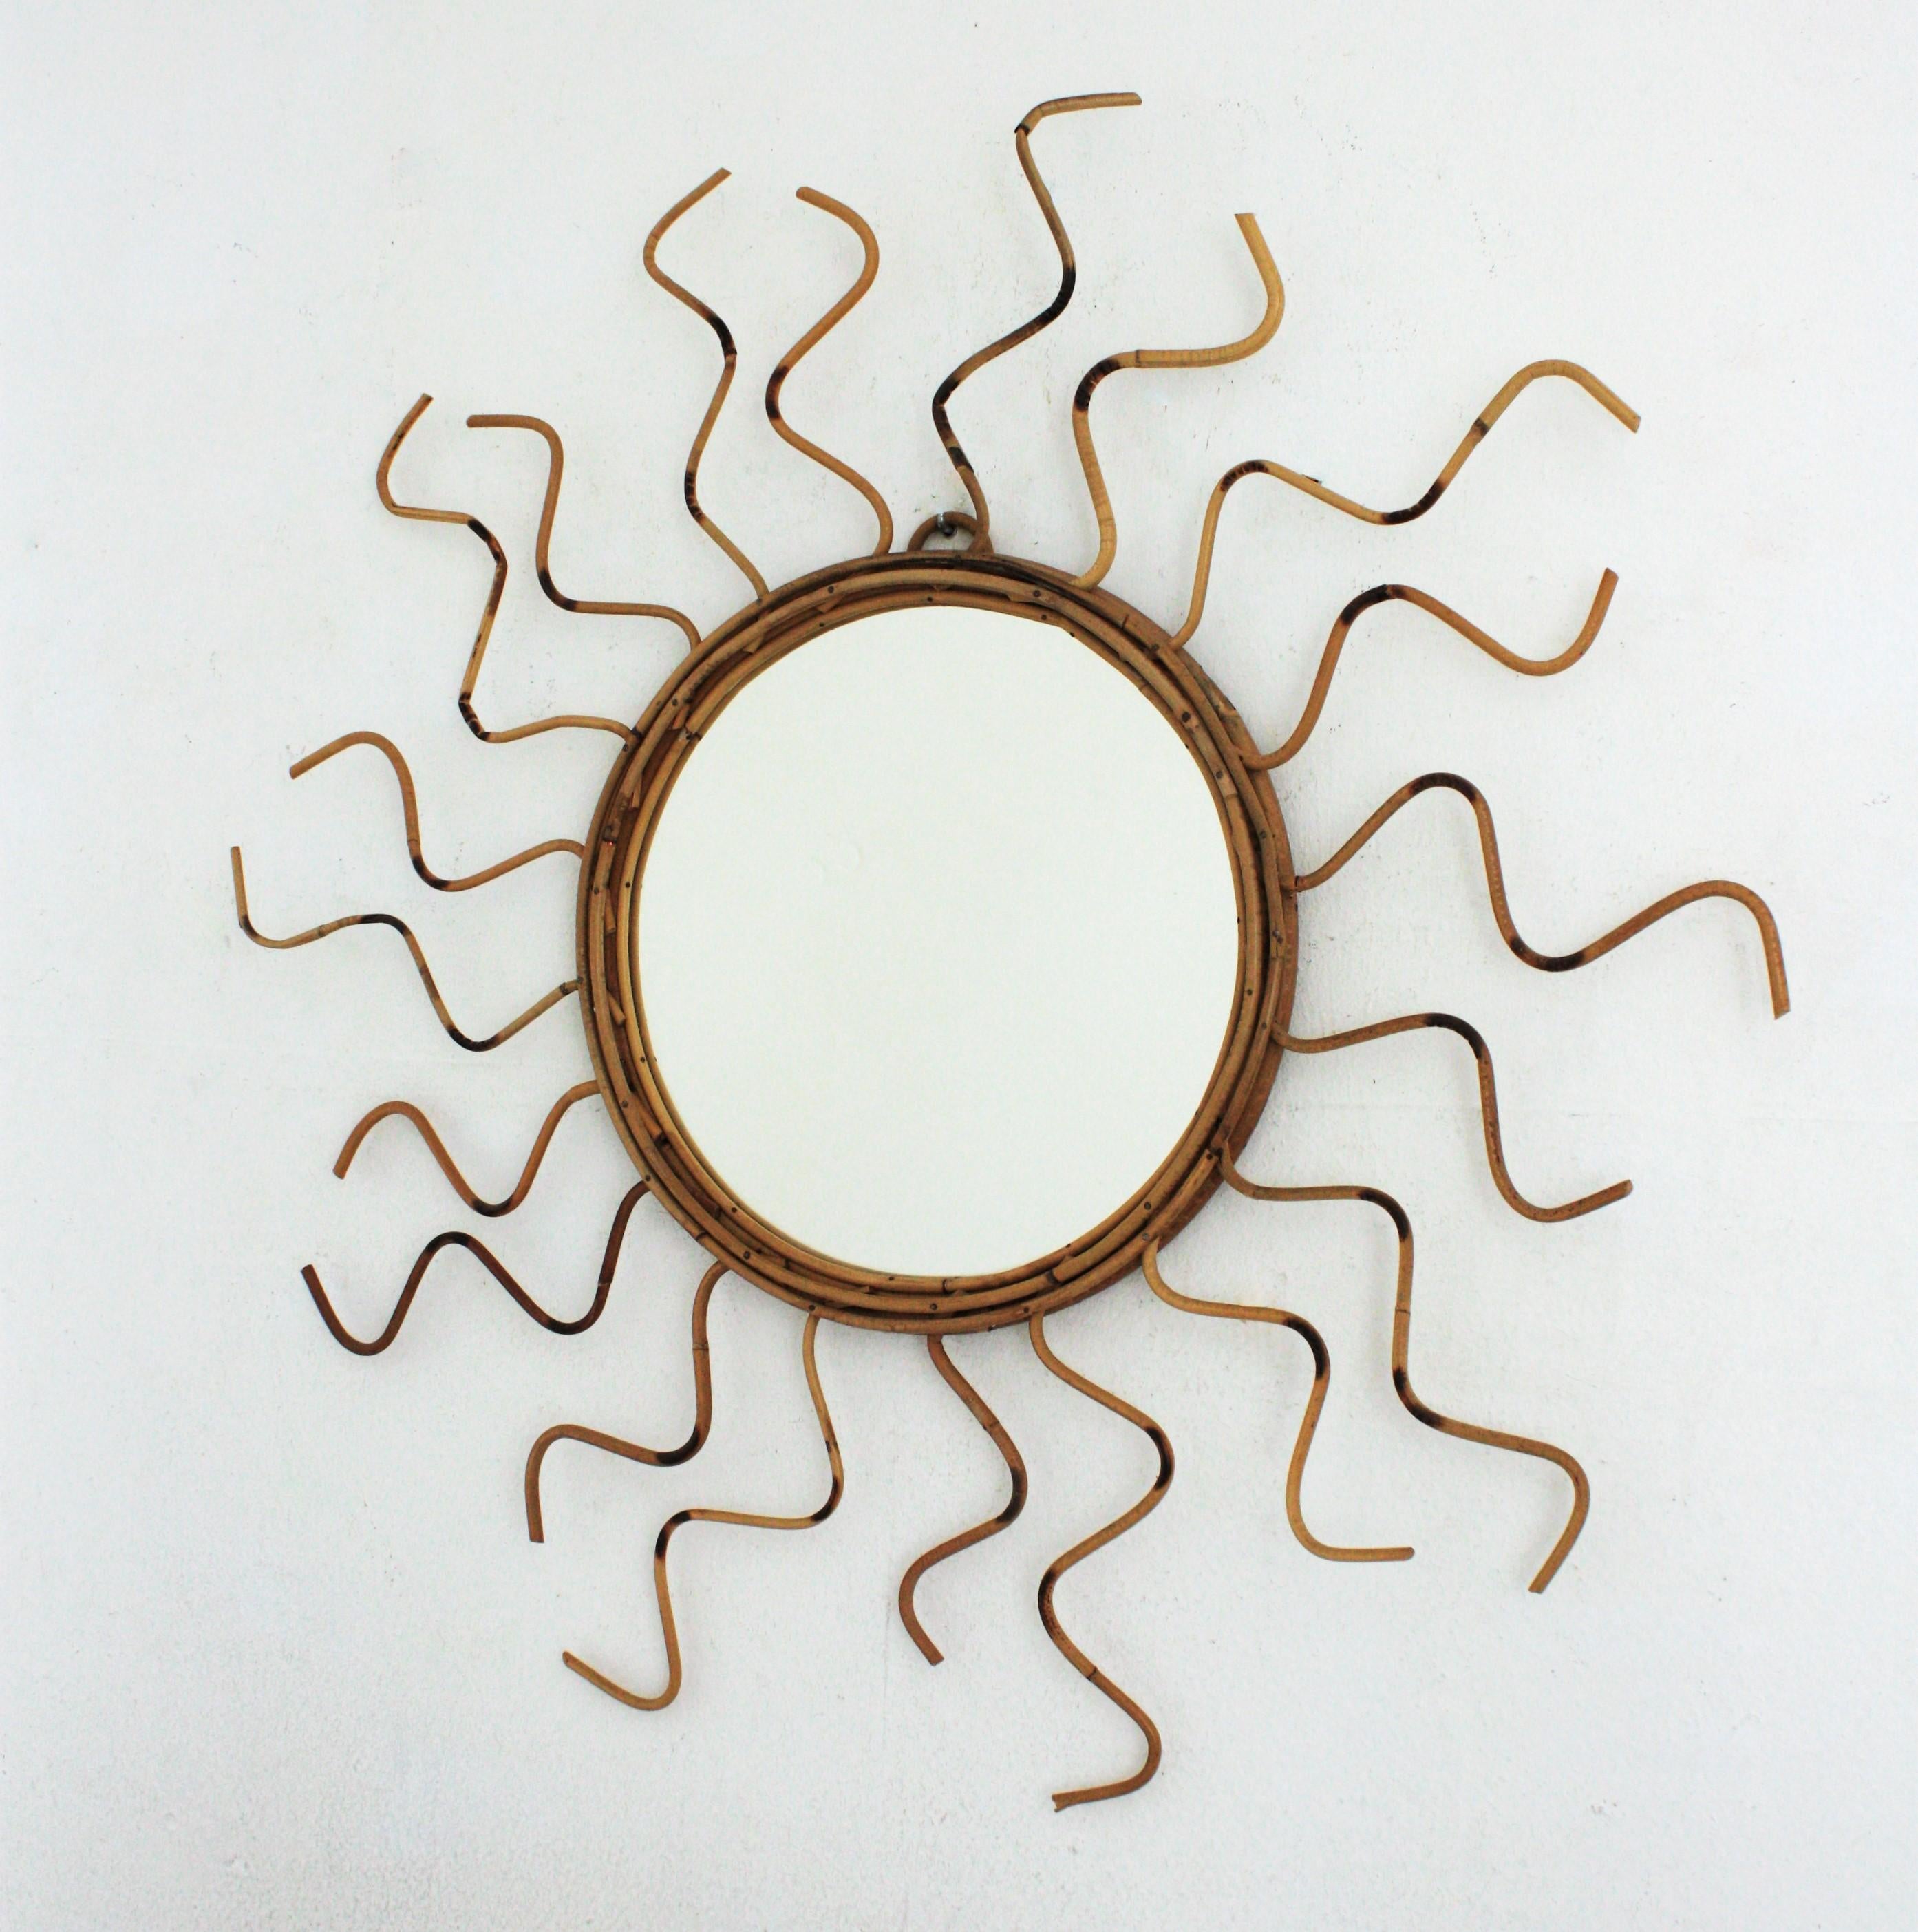 20th Century French Riviera Rattan Sunburst Mirror with Curly Rays, 1960s For Sale